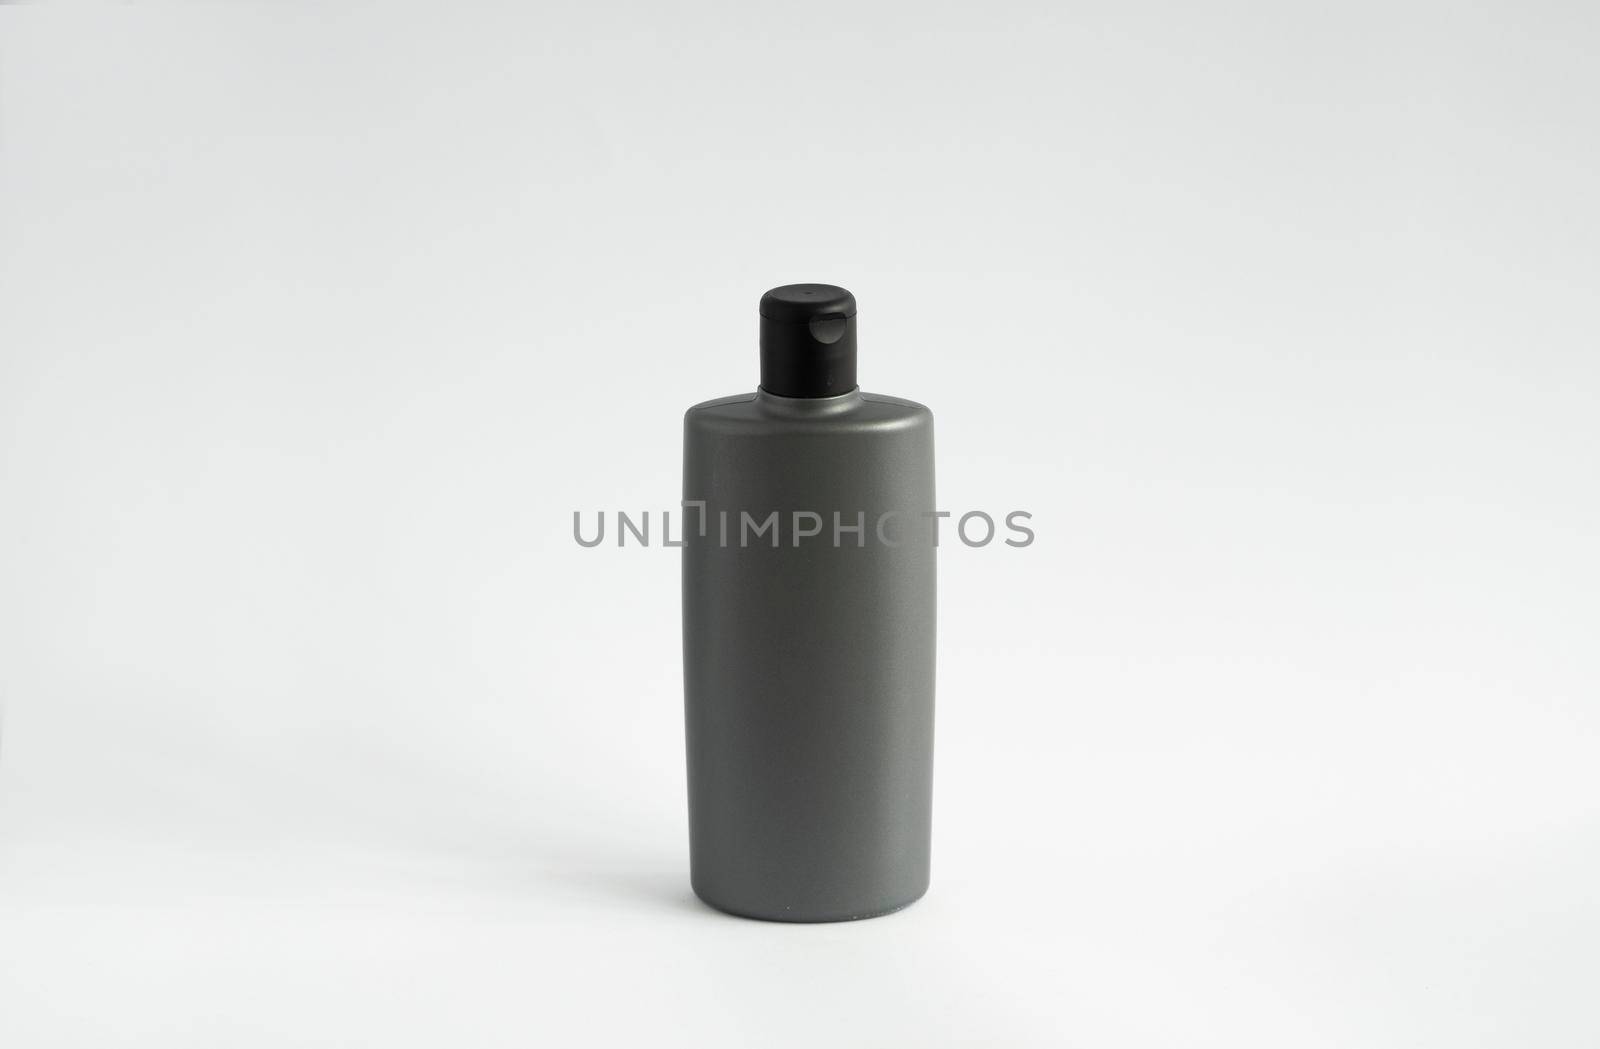 Gray bottle of shampoo, conditioner, hair rinse, mouthwash, on a white background